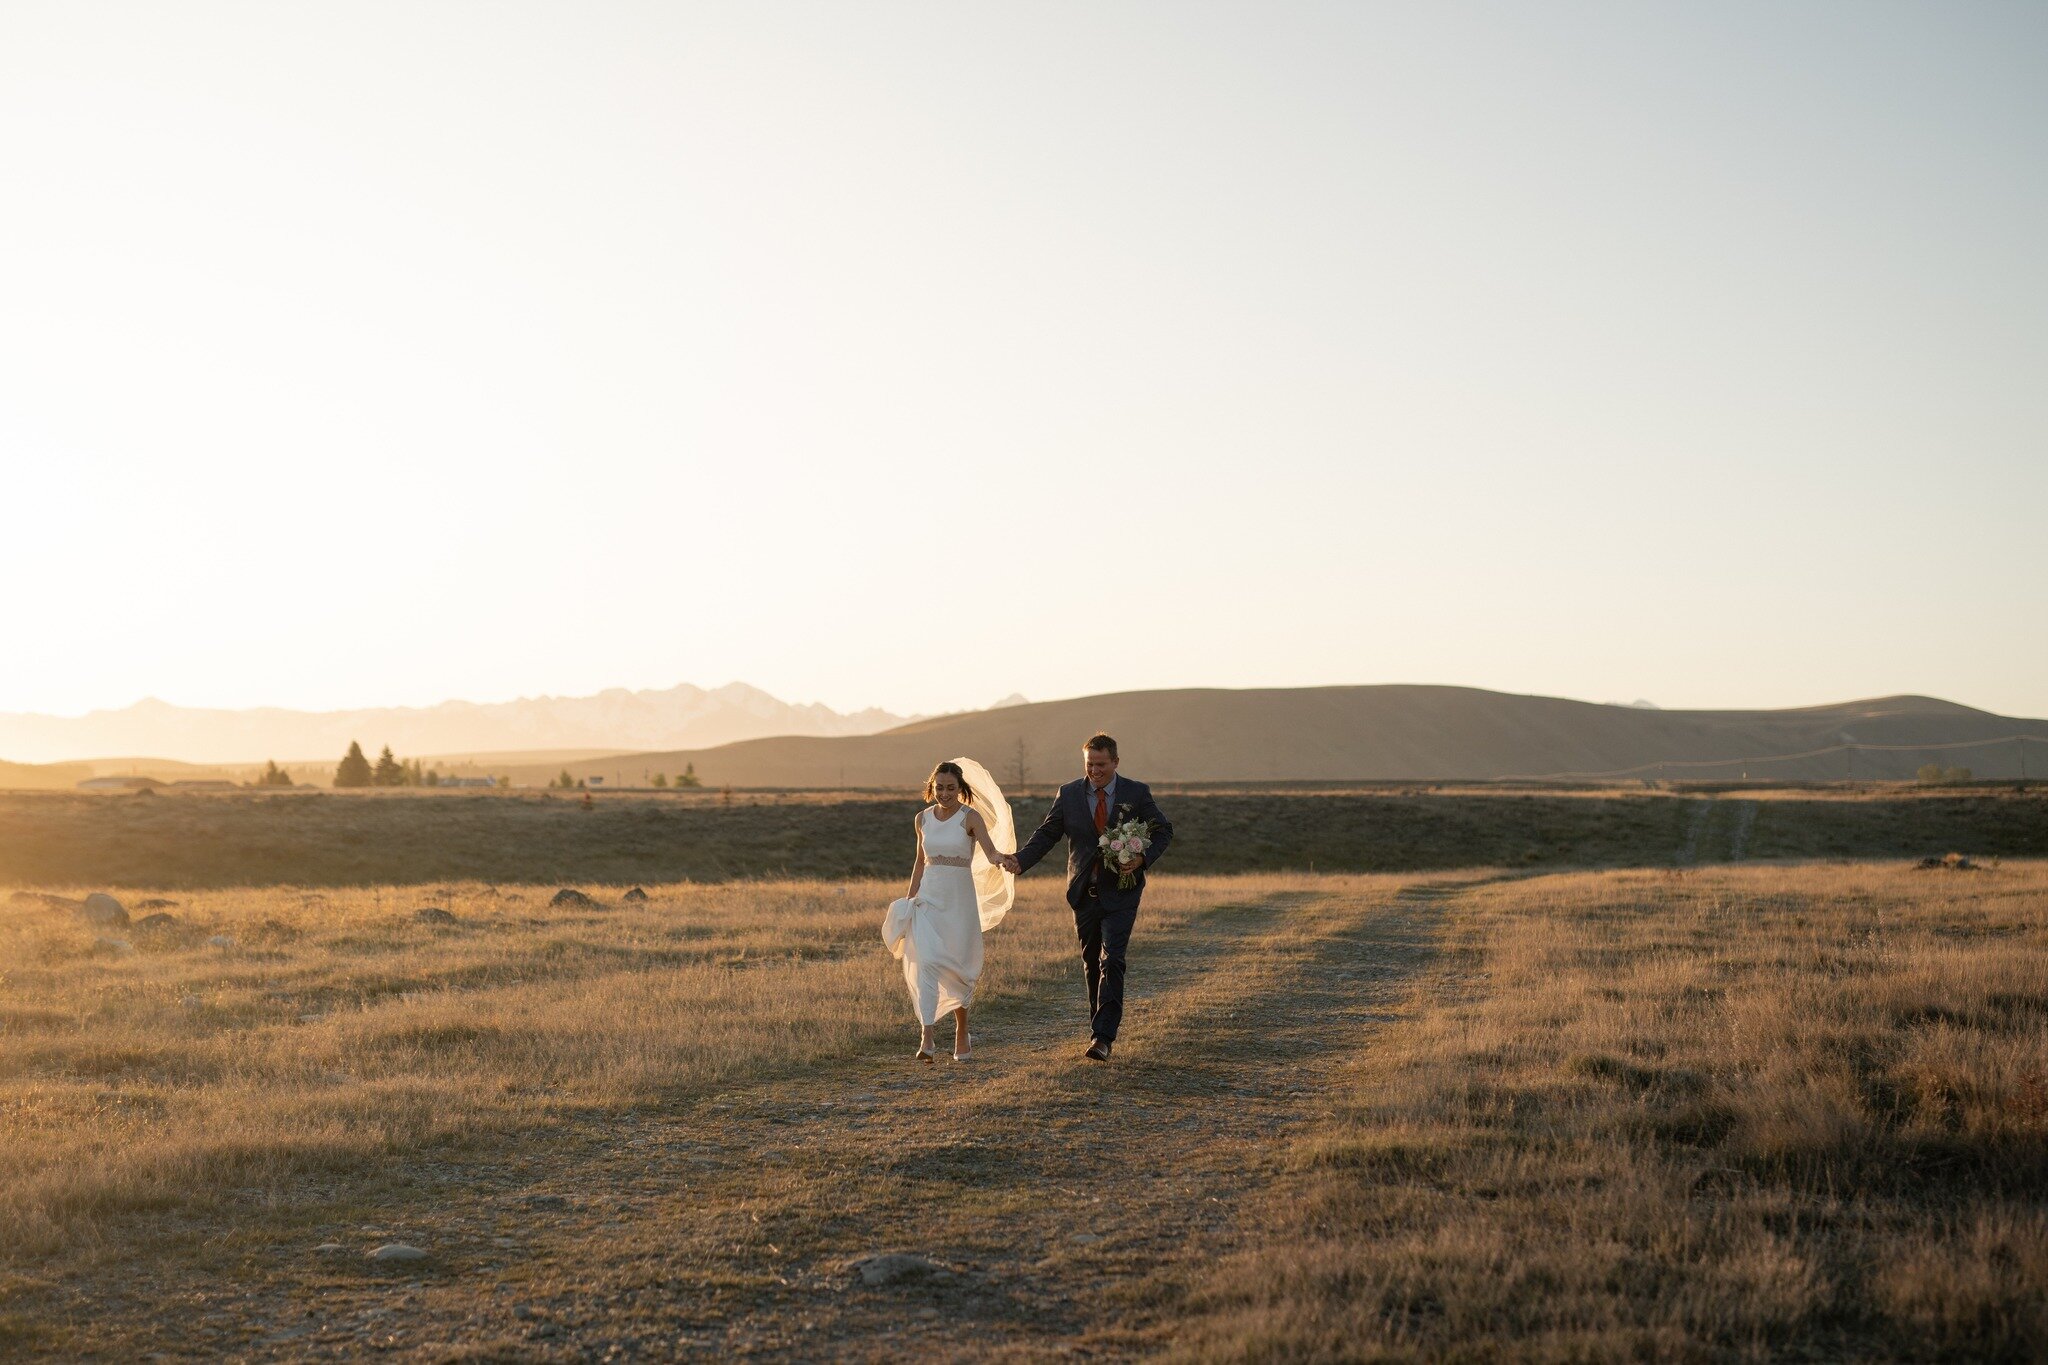 I want to melt over sunsets like this one ⭐⭐Tekapo proving to me once again how beautiful it is down there! D&amp;M getting married in Mackenzie sure was the right choice!
.
.
.
 #tekapo #tekaponz #tekapolake #tekapowedding #tekapoweddings #tekapowed